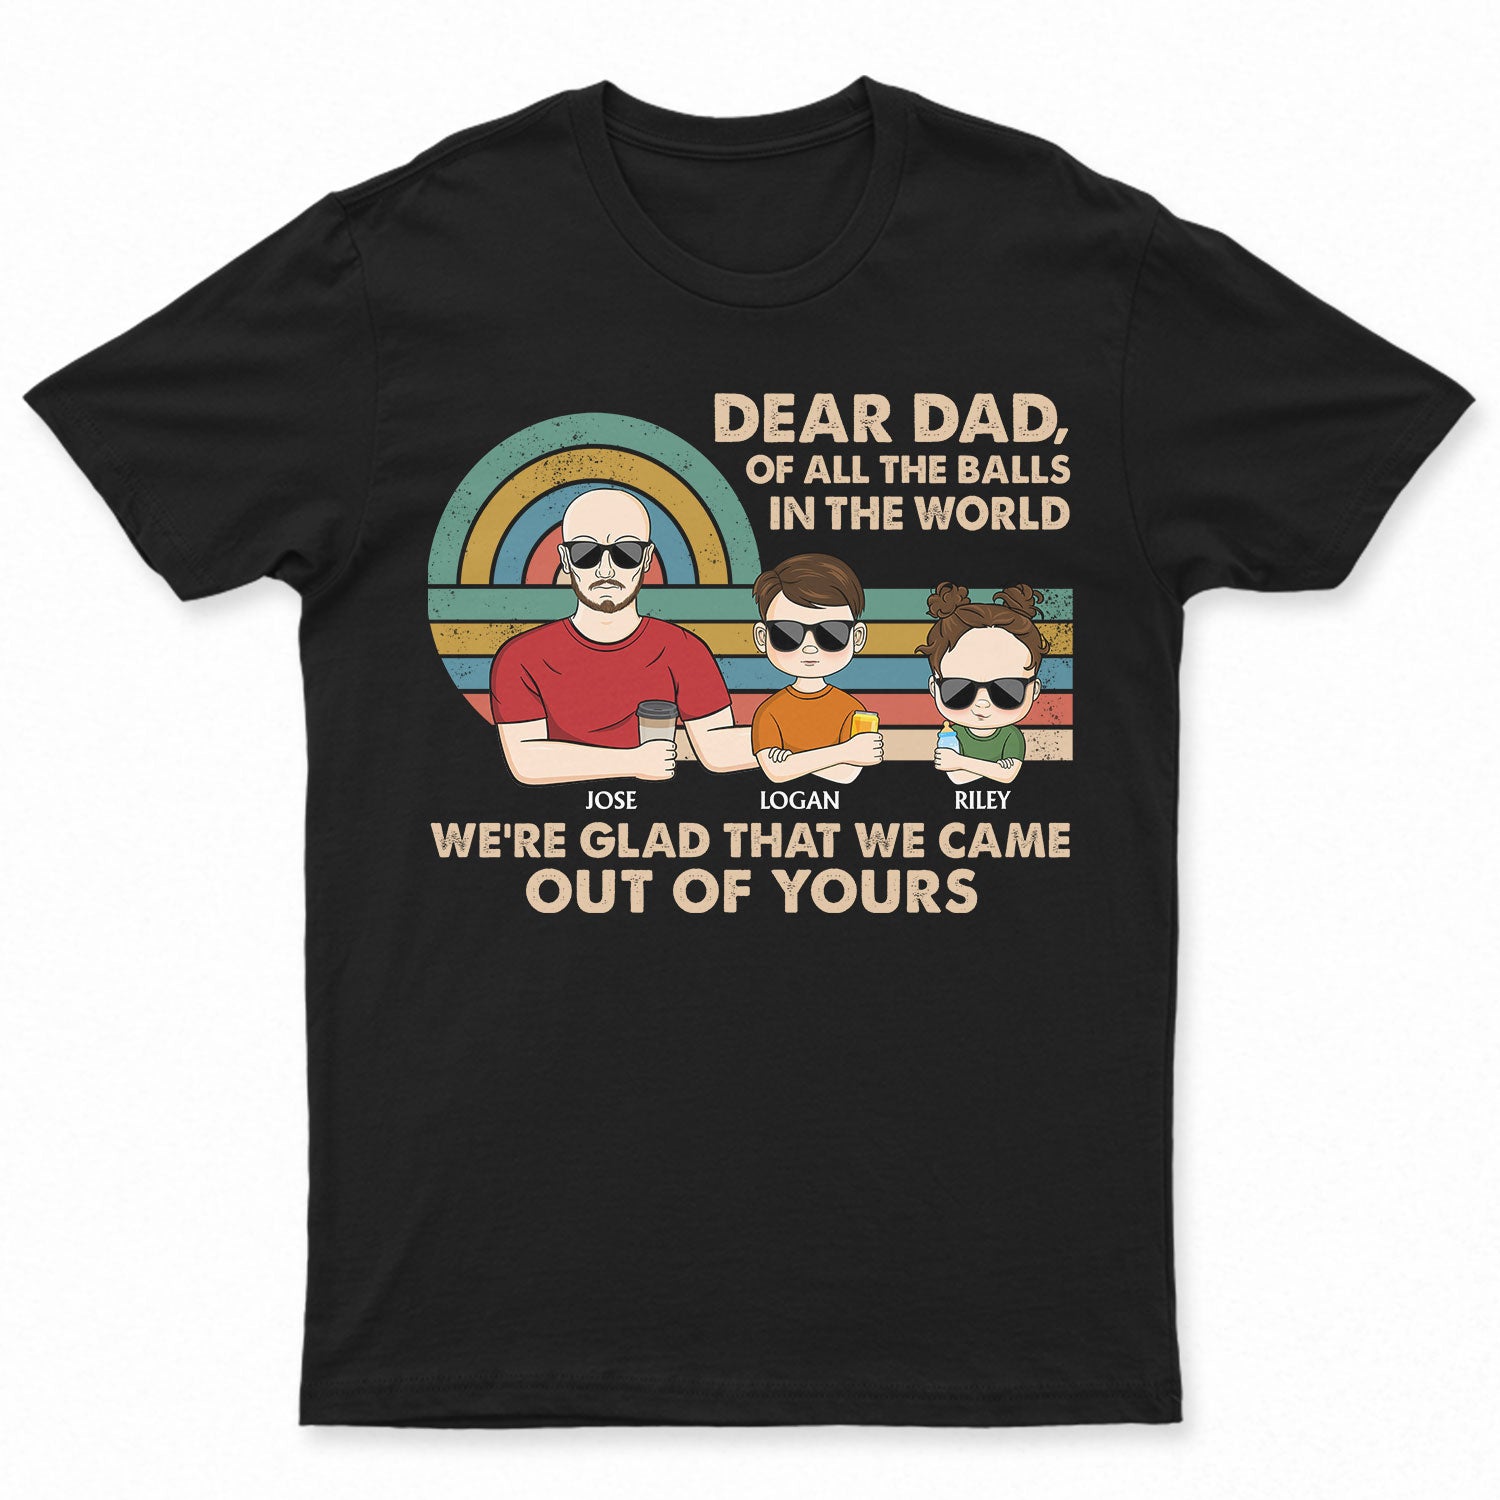 Dear Dad Of All The Balls In The World - Birthday, Loving Gift For Dad, Father, Grandpa, Grandfather - Personalized Custom T Shirt